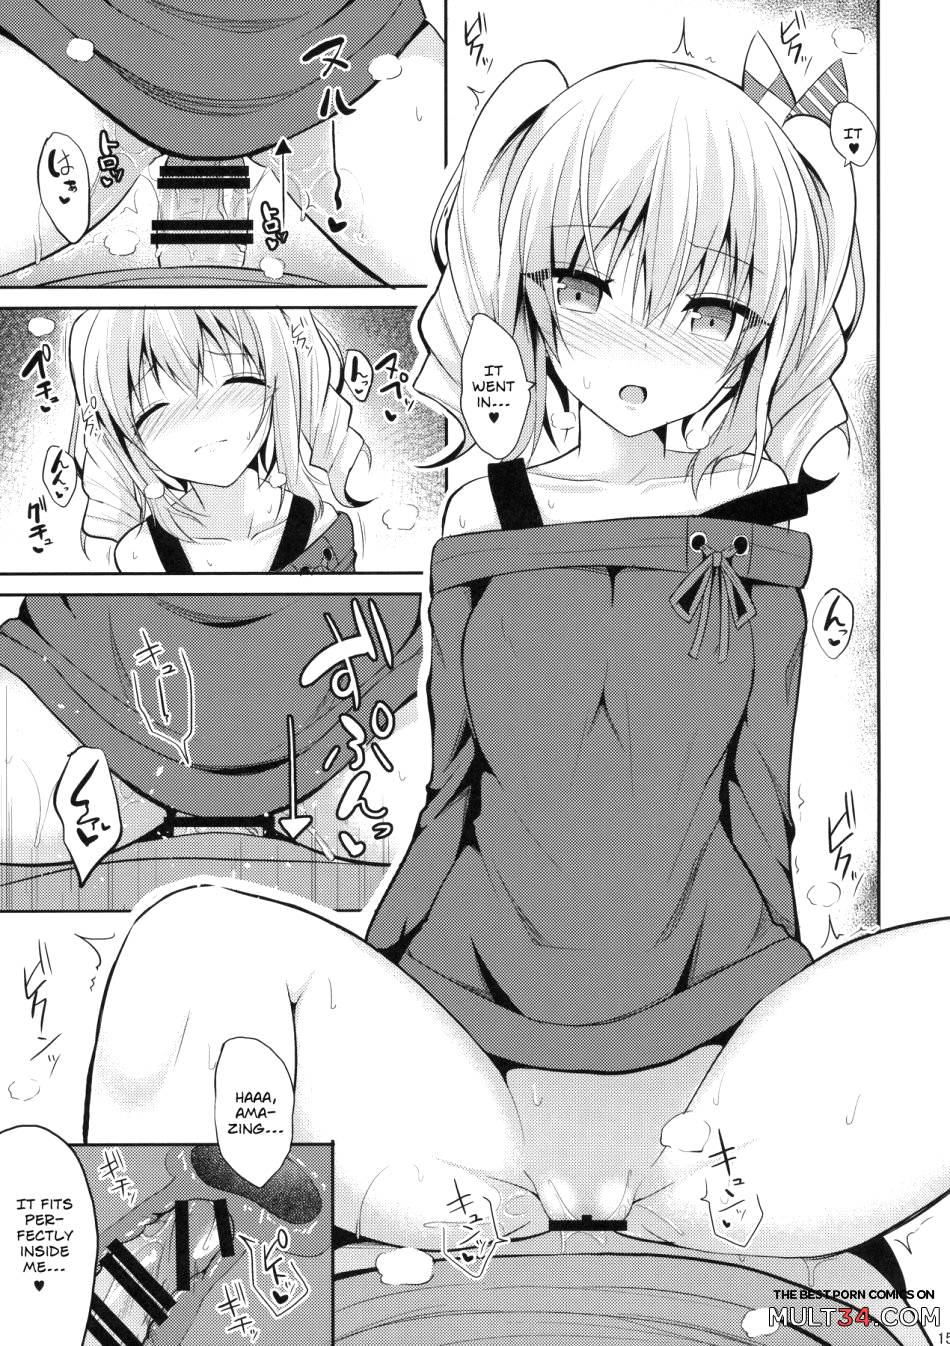 My Sexy Private Life with Kashima page 14